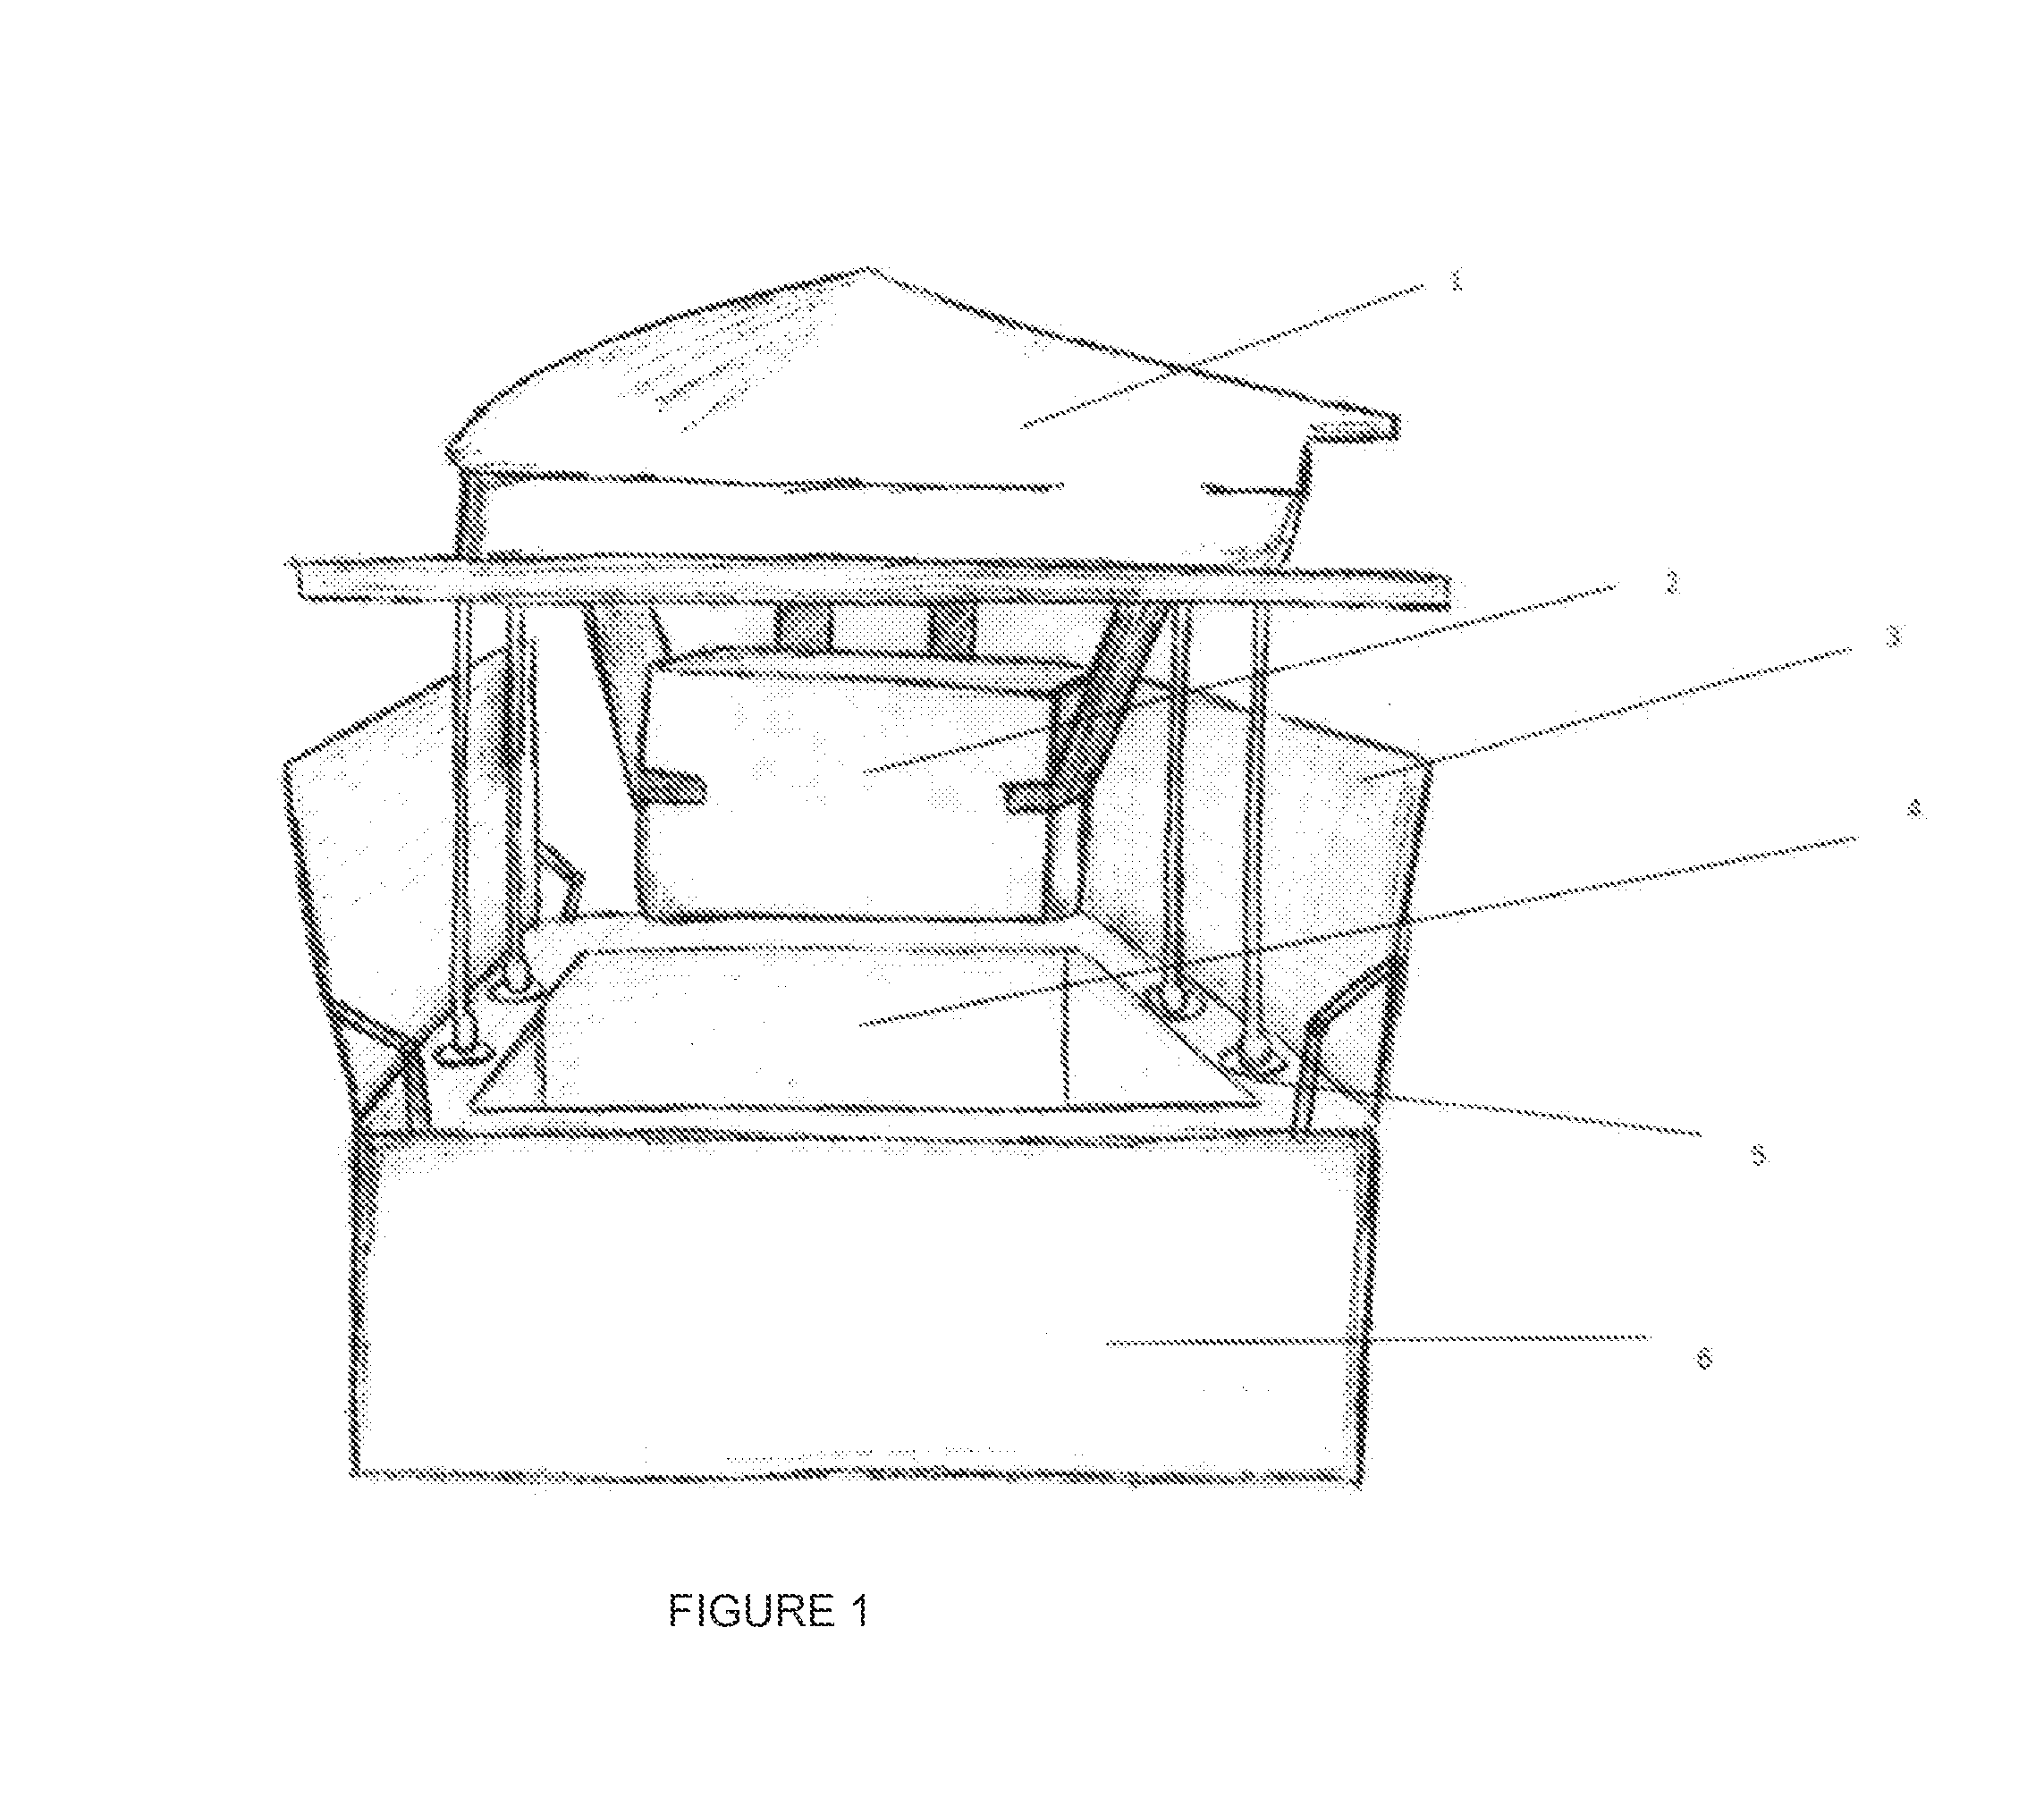 Drone Docking Station and Delivery System